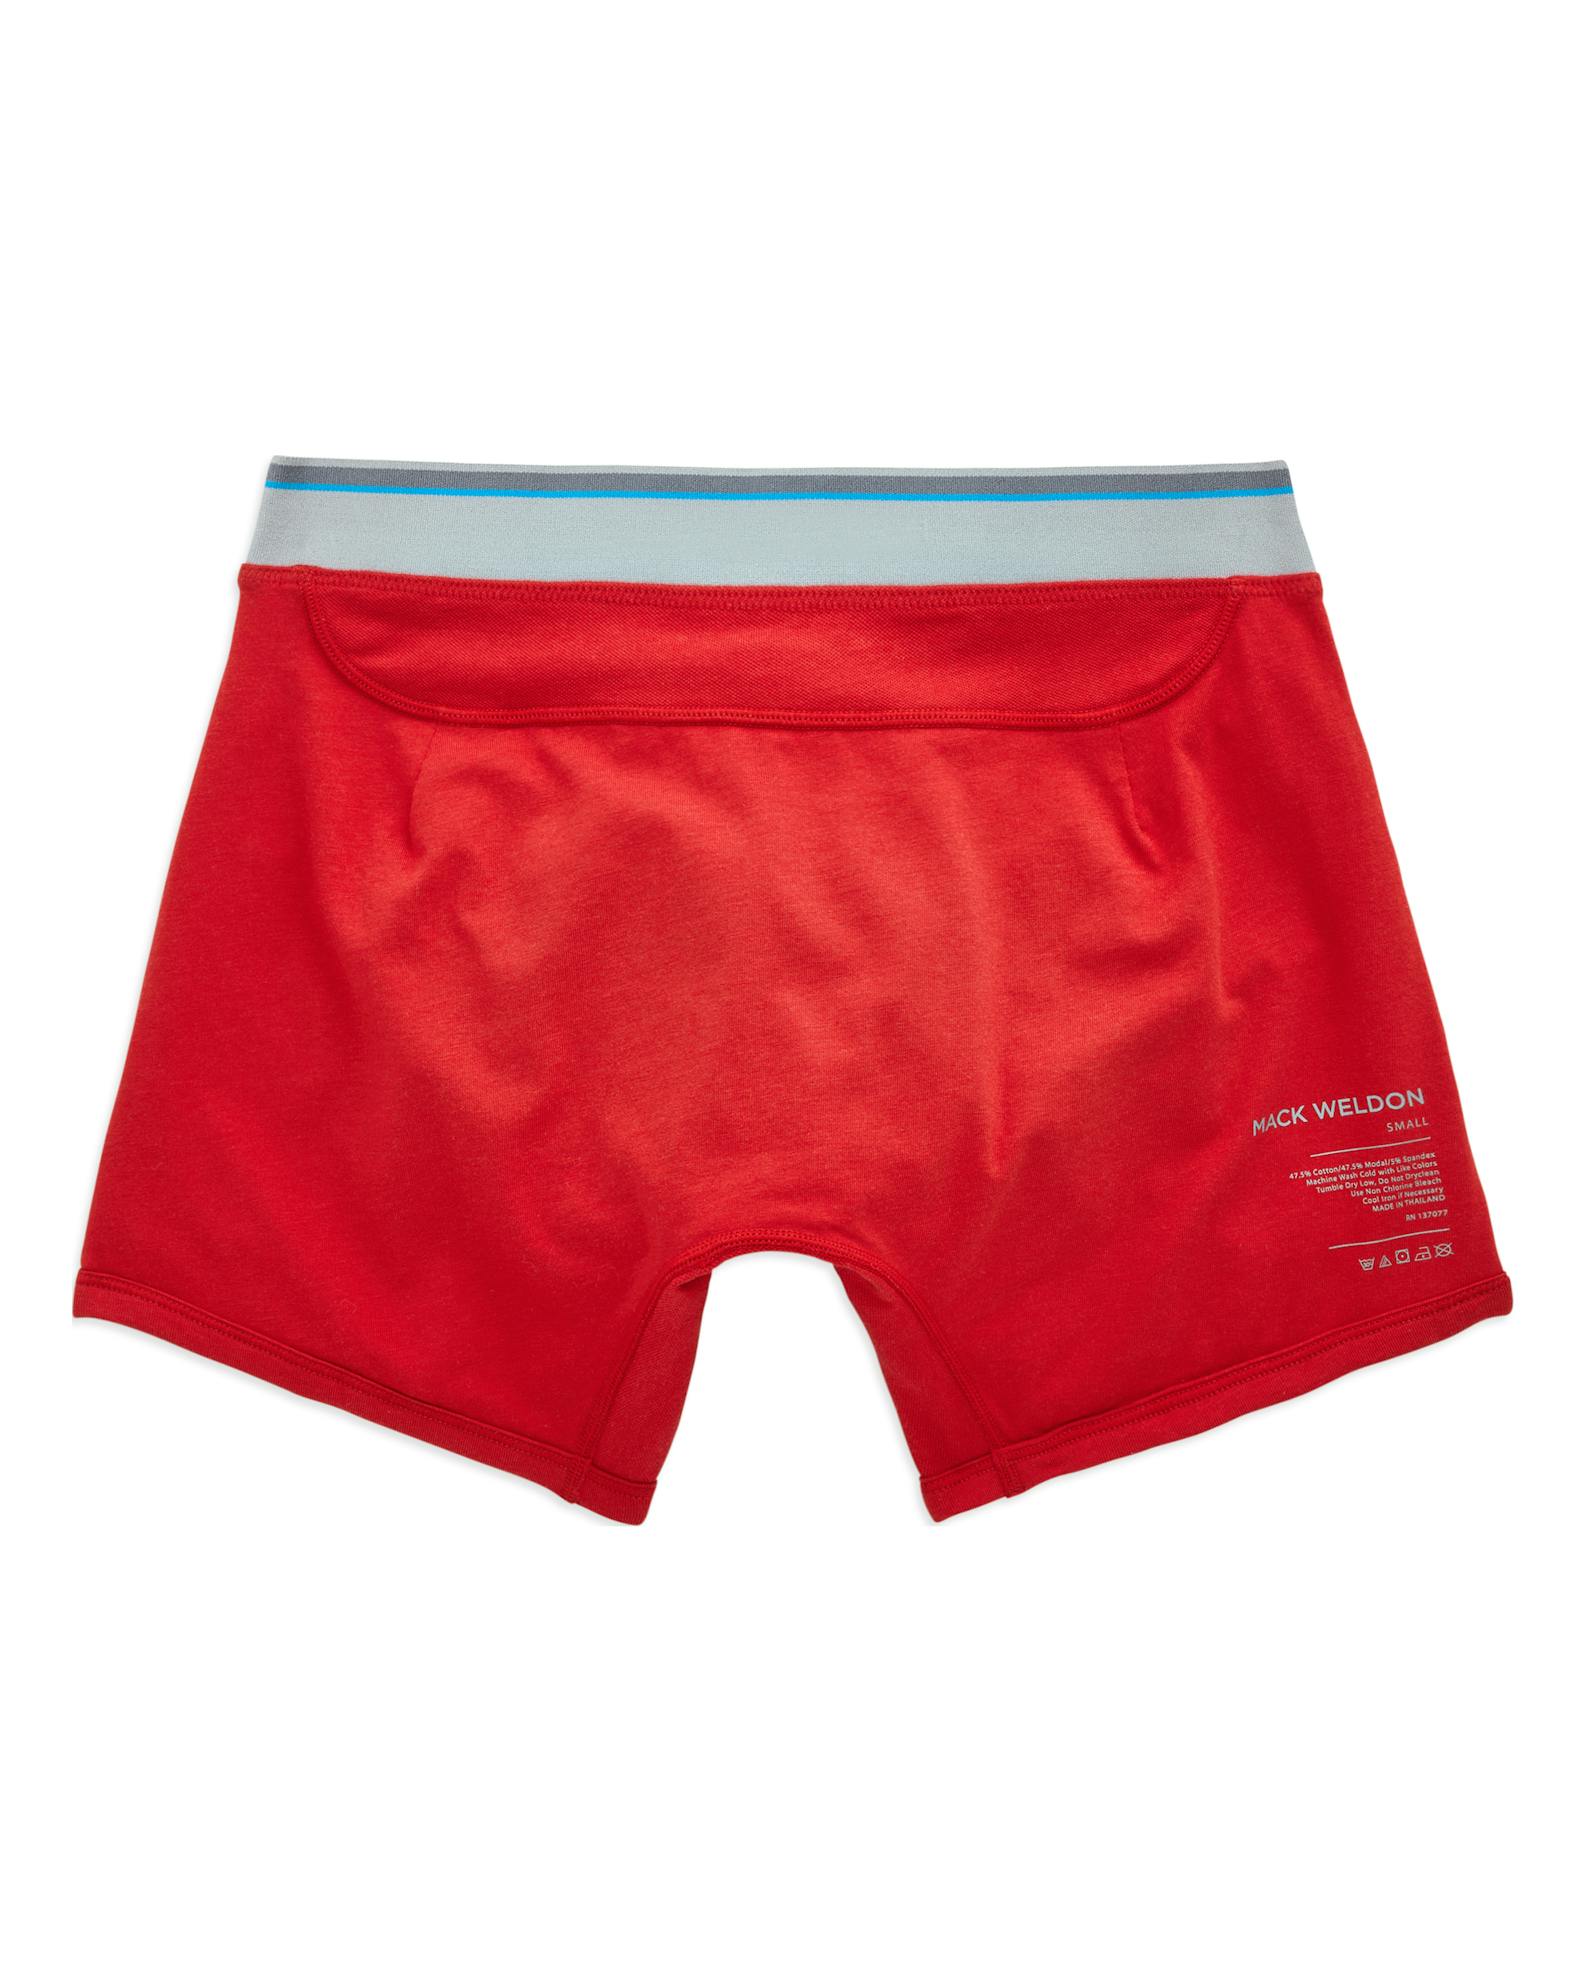 Mack Weldon 18-Hour Jersey Boxer Brief - No Fear Red